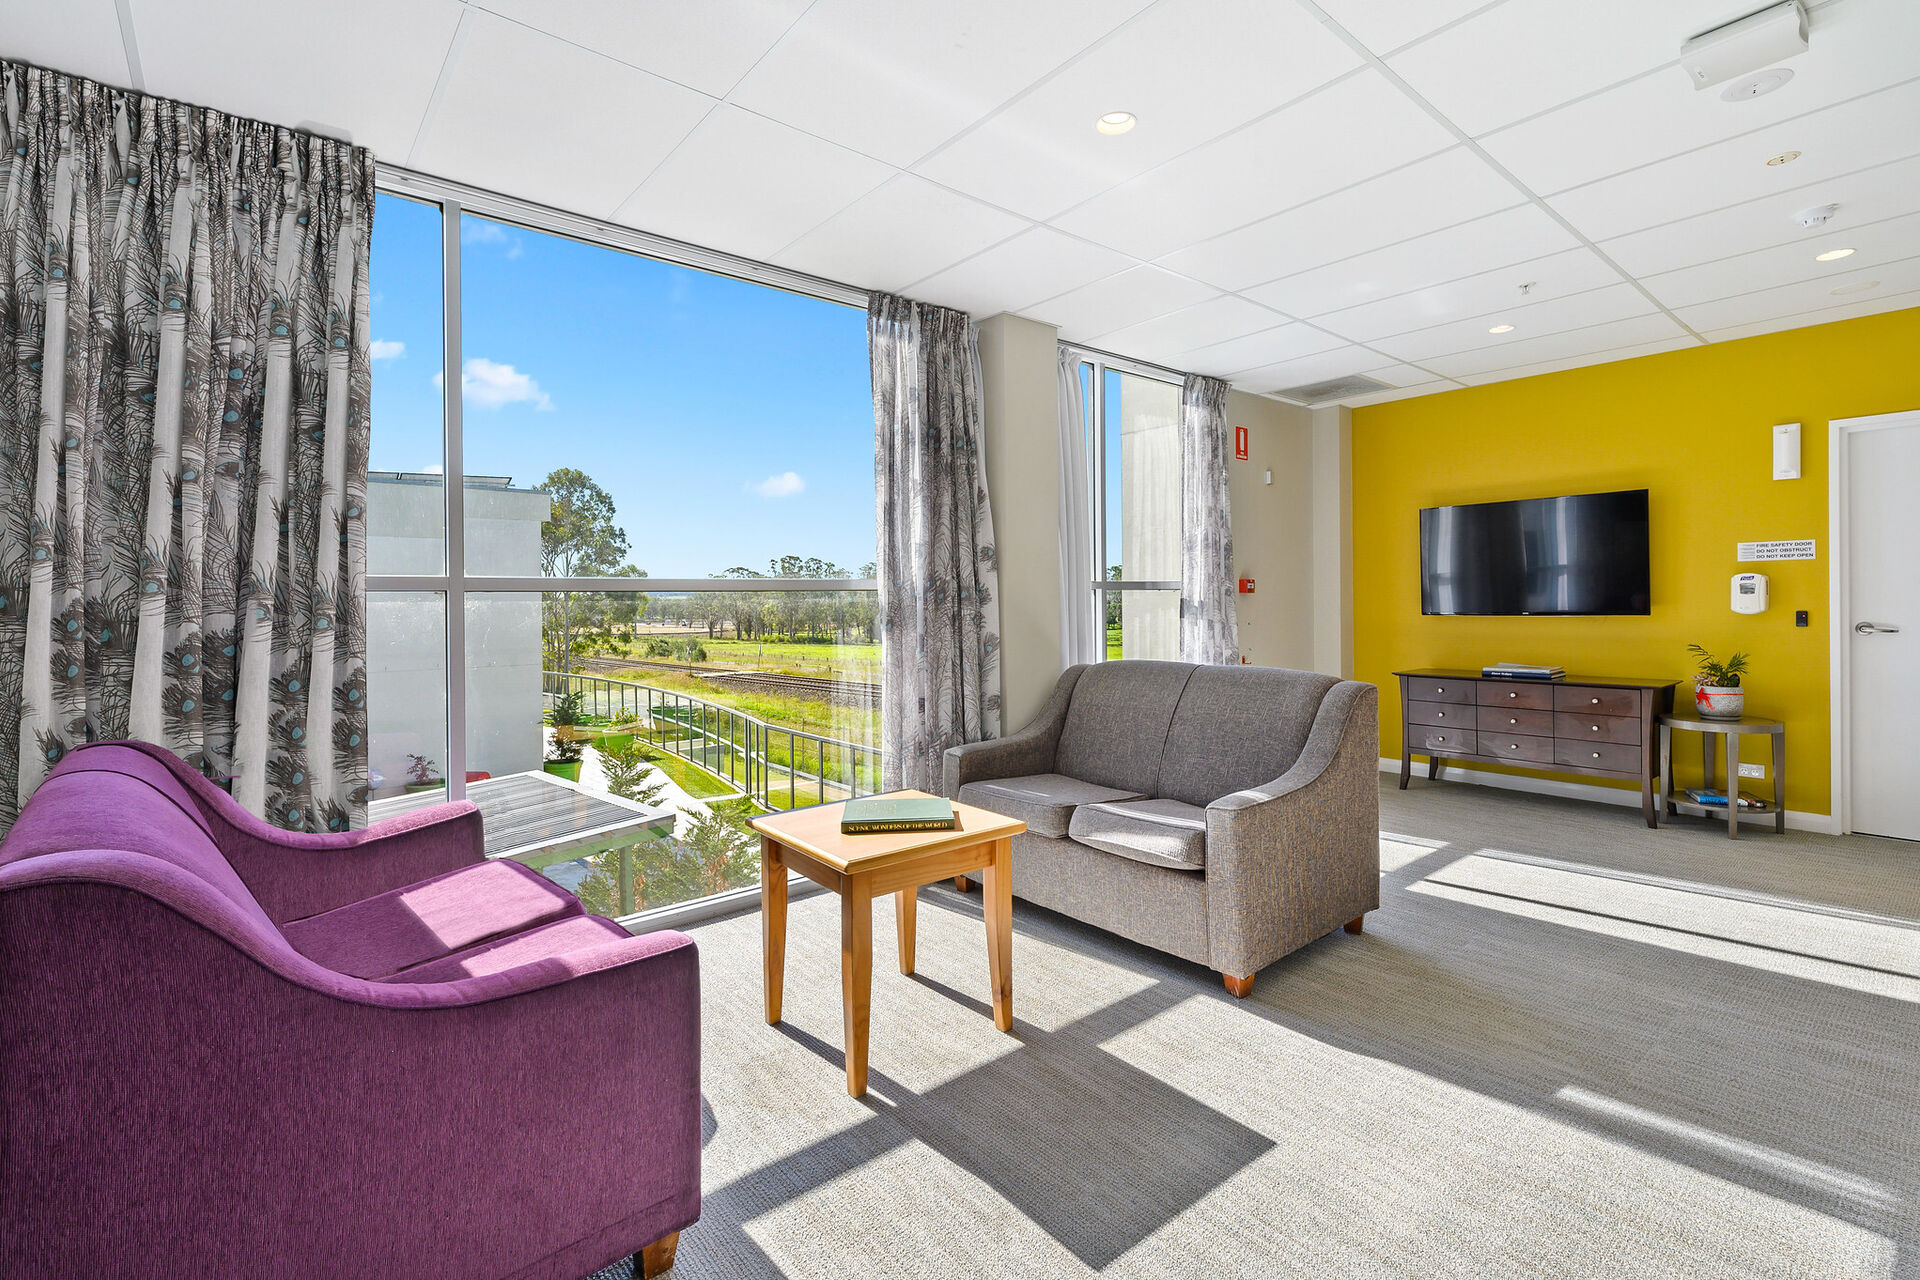 communal indoor sitting area for nursing home residents at baptistcare durham green centre aged care home in menangle nsw